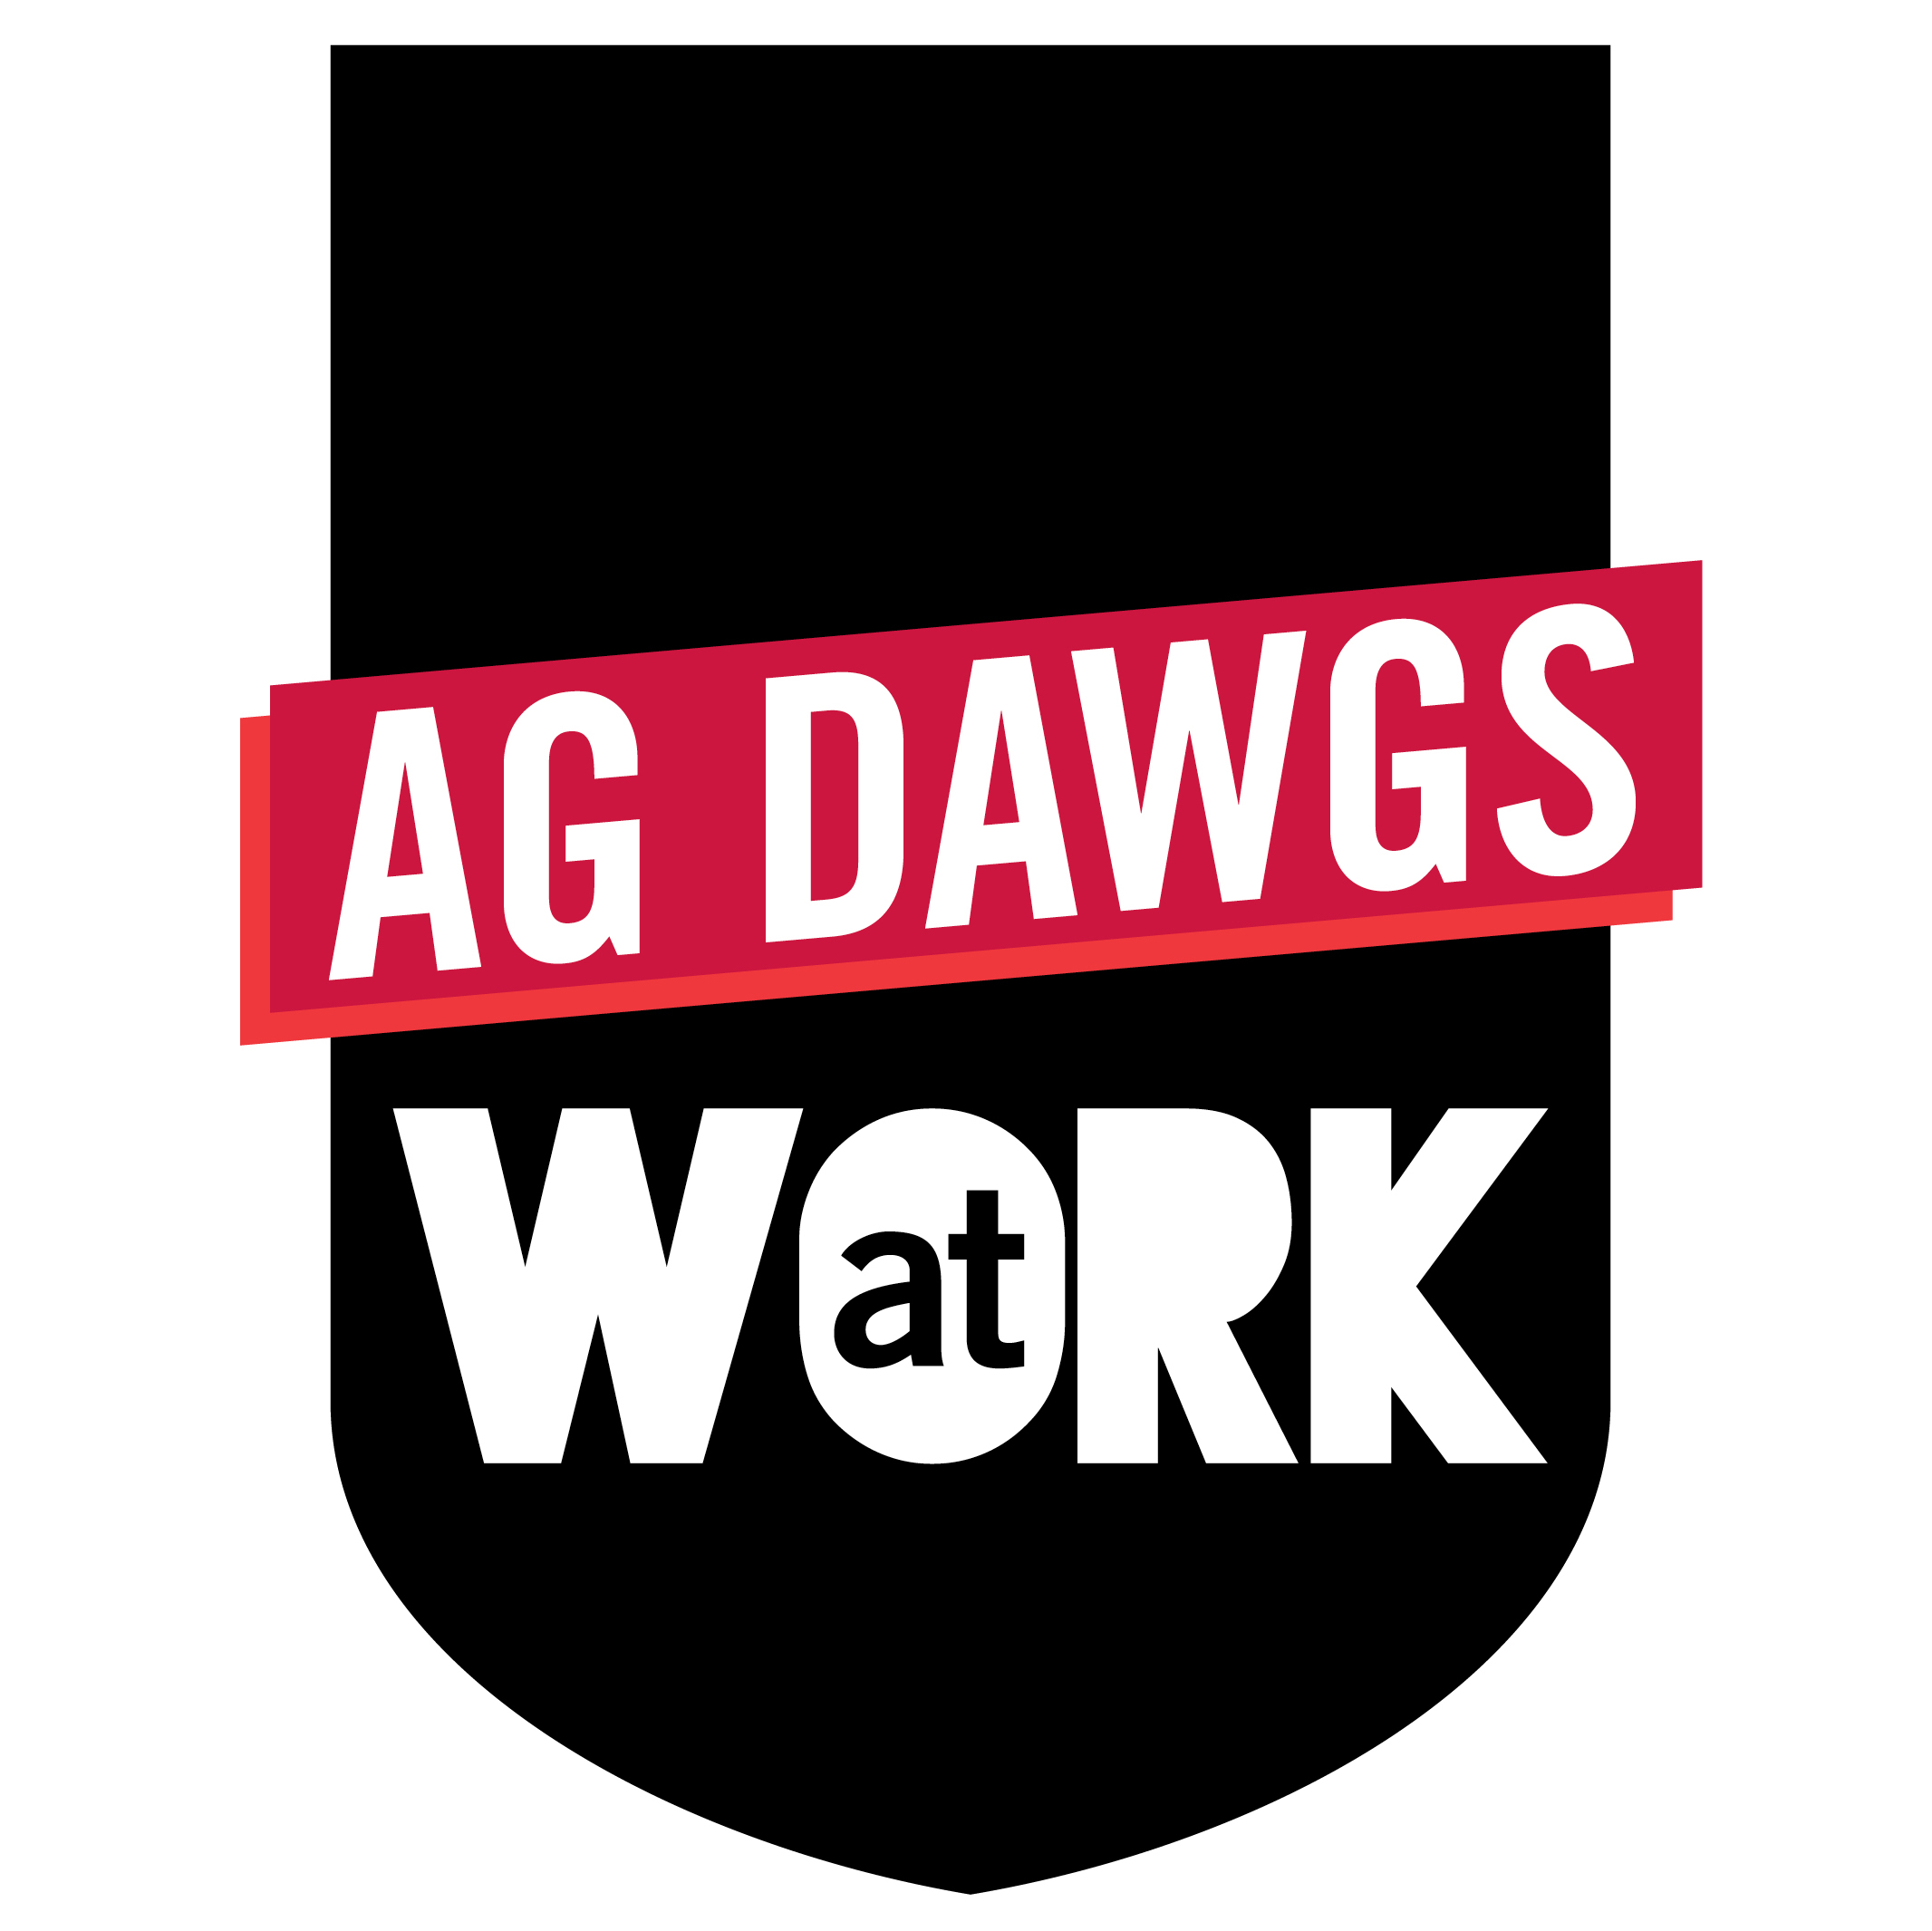 Ag Dawgs at Work